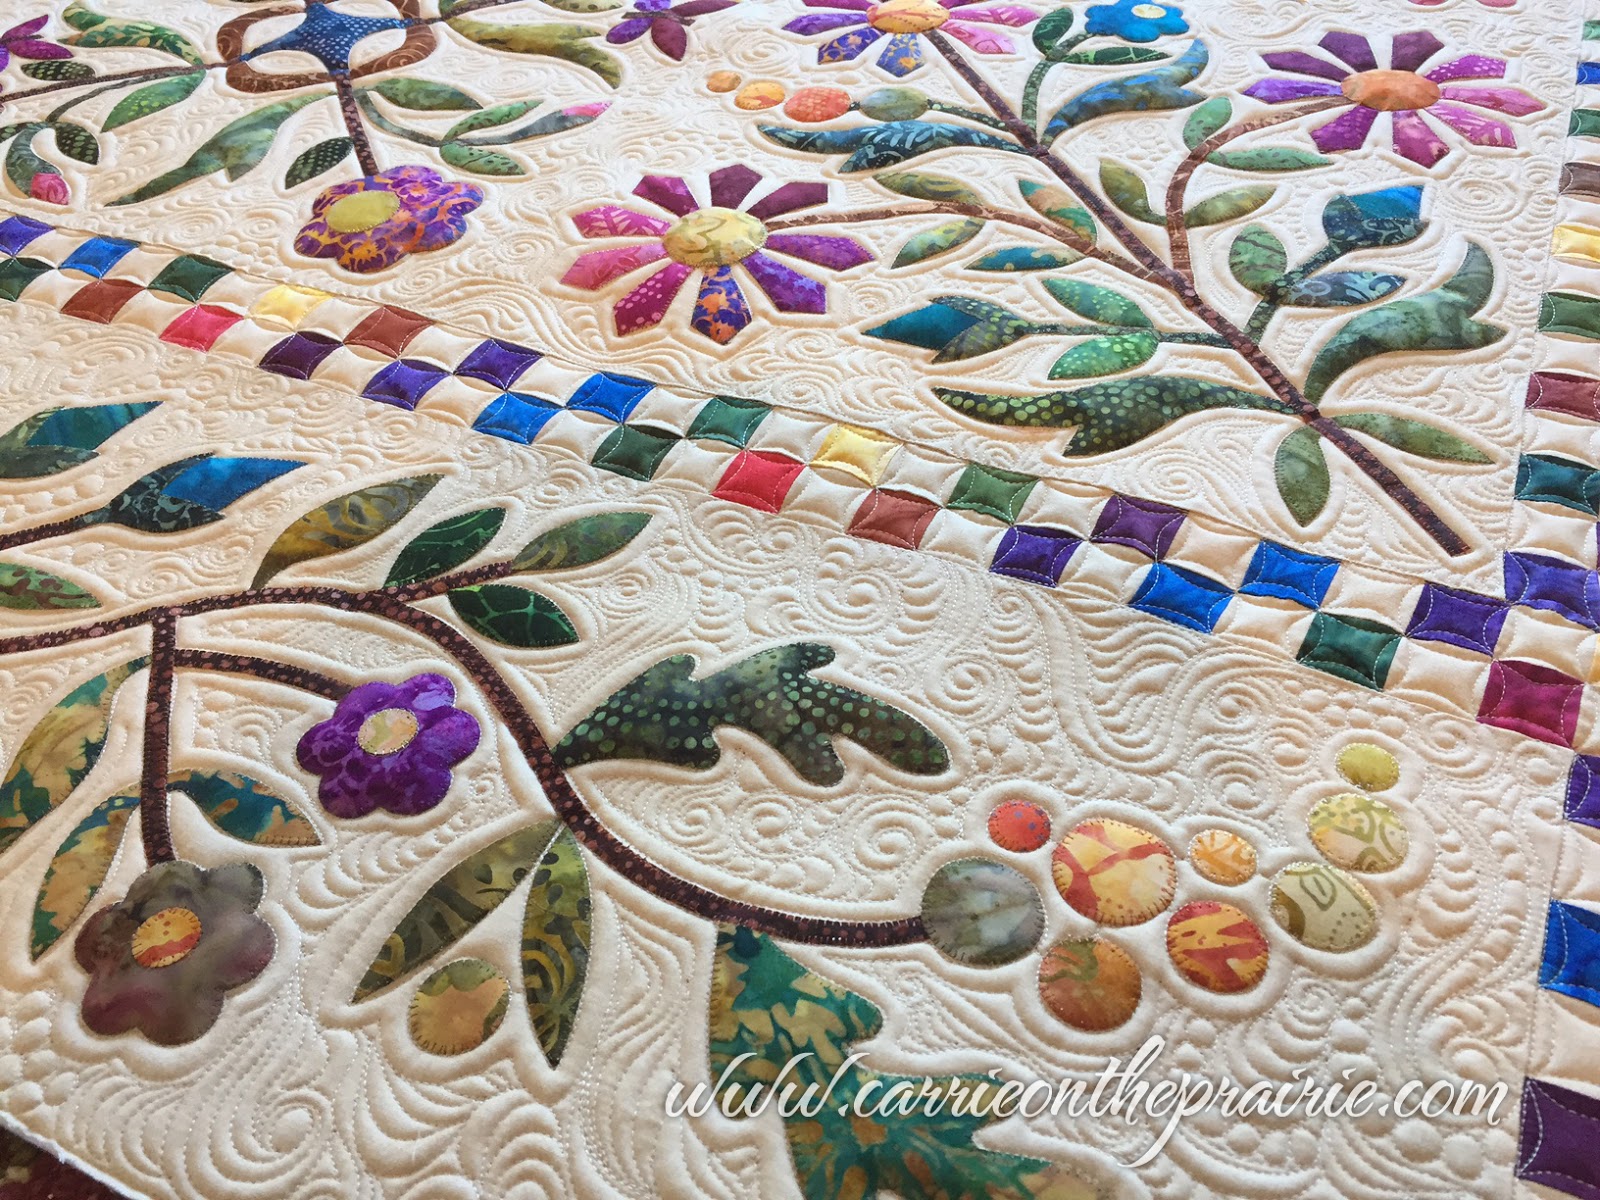 How to quilt embroidery on quilts - APQS